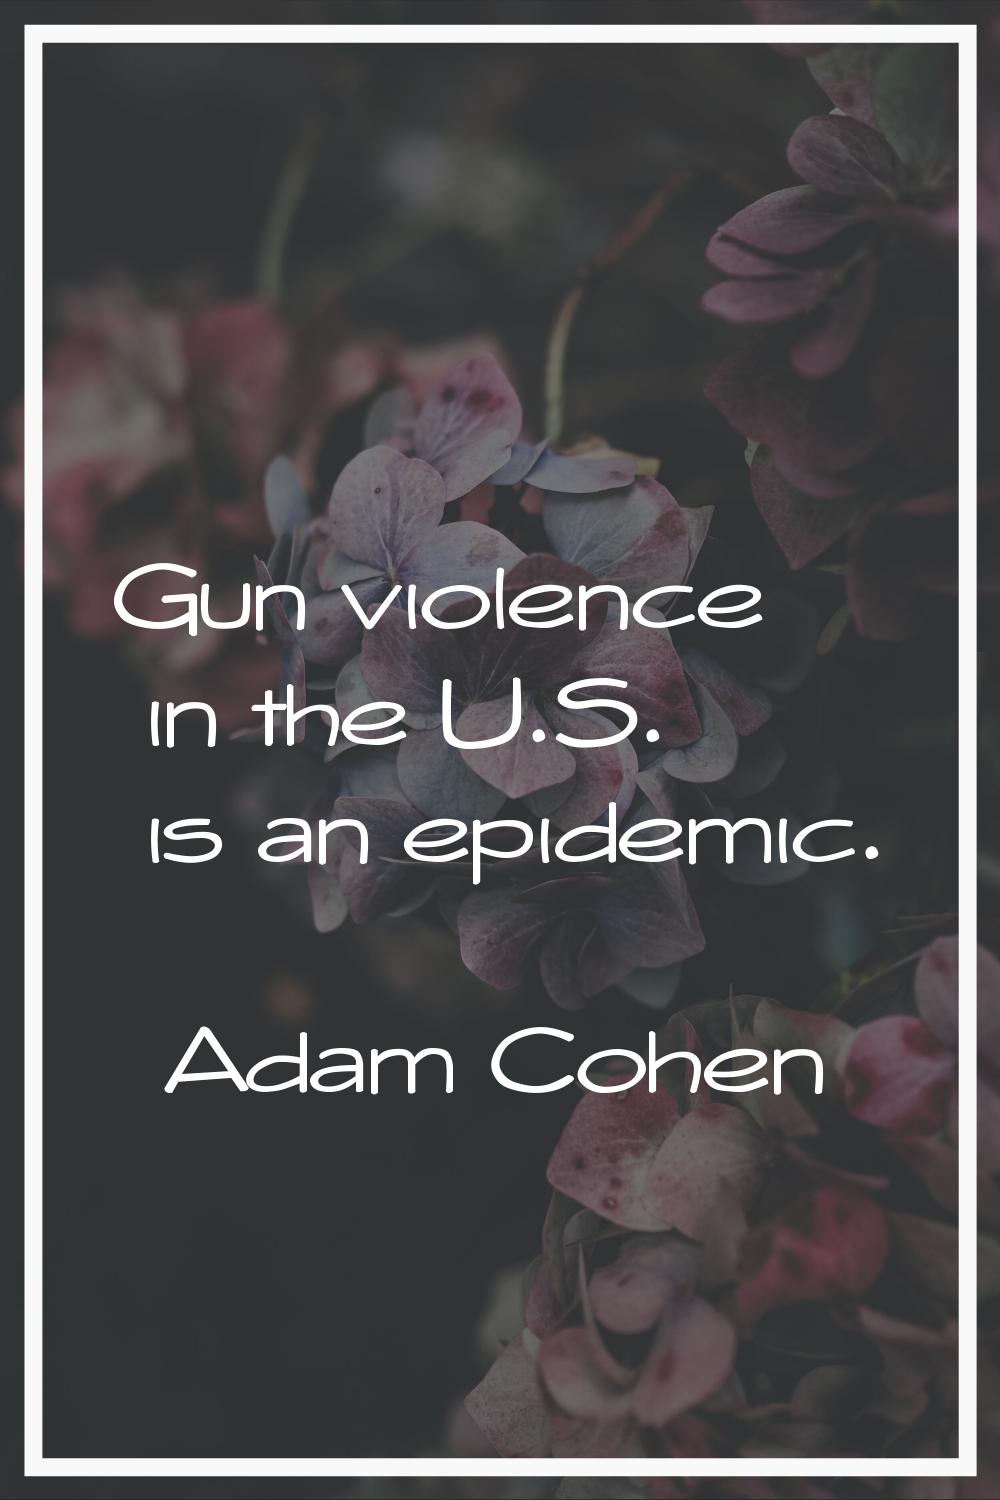 Gun violence in the U.S. is an epidemic.